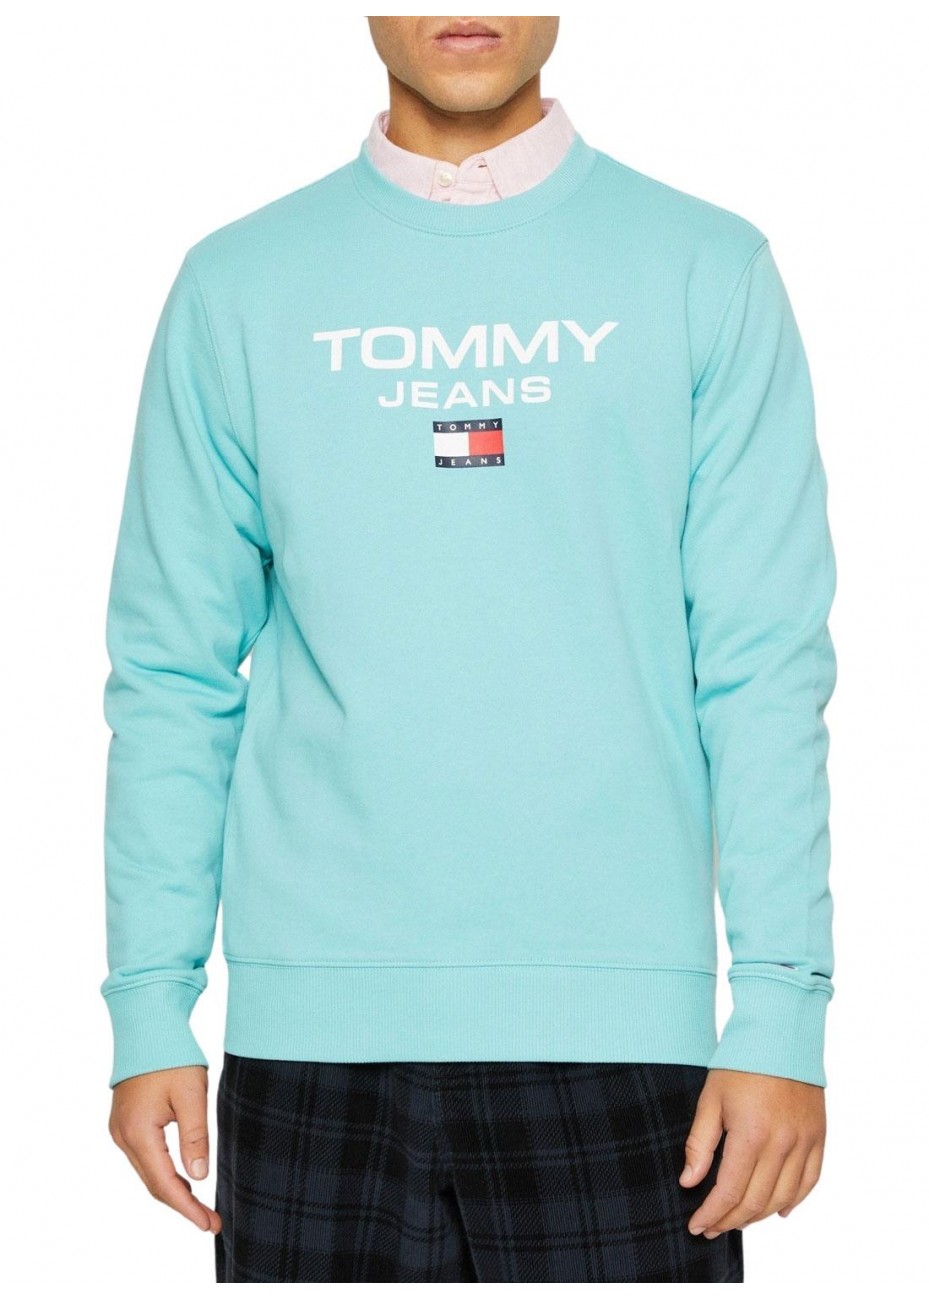 Sudadera Tommy Jeans Reg Entry verde agua